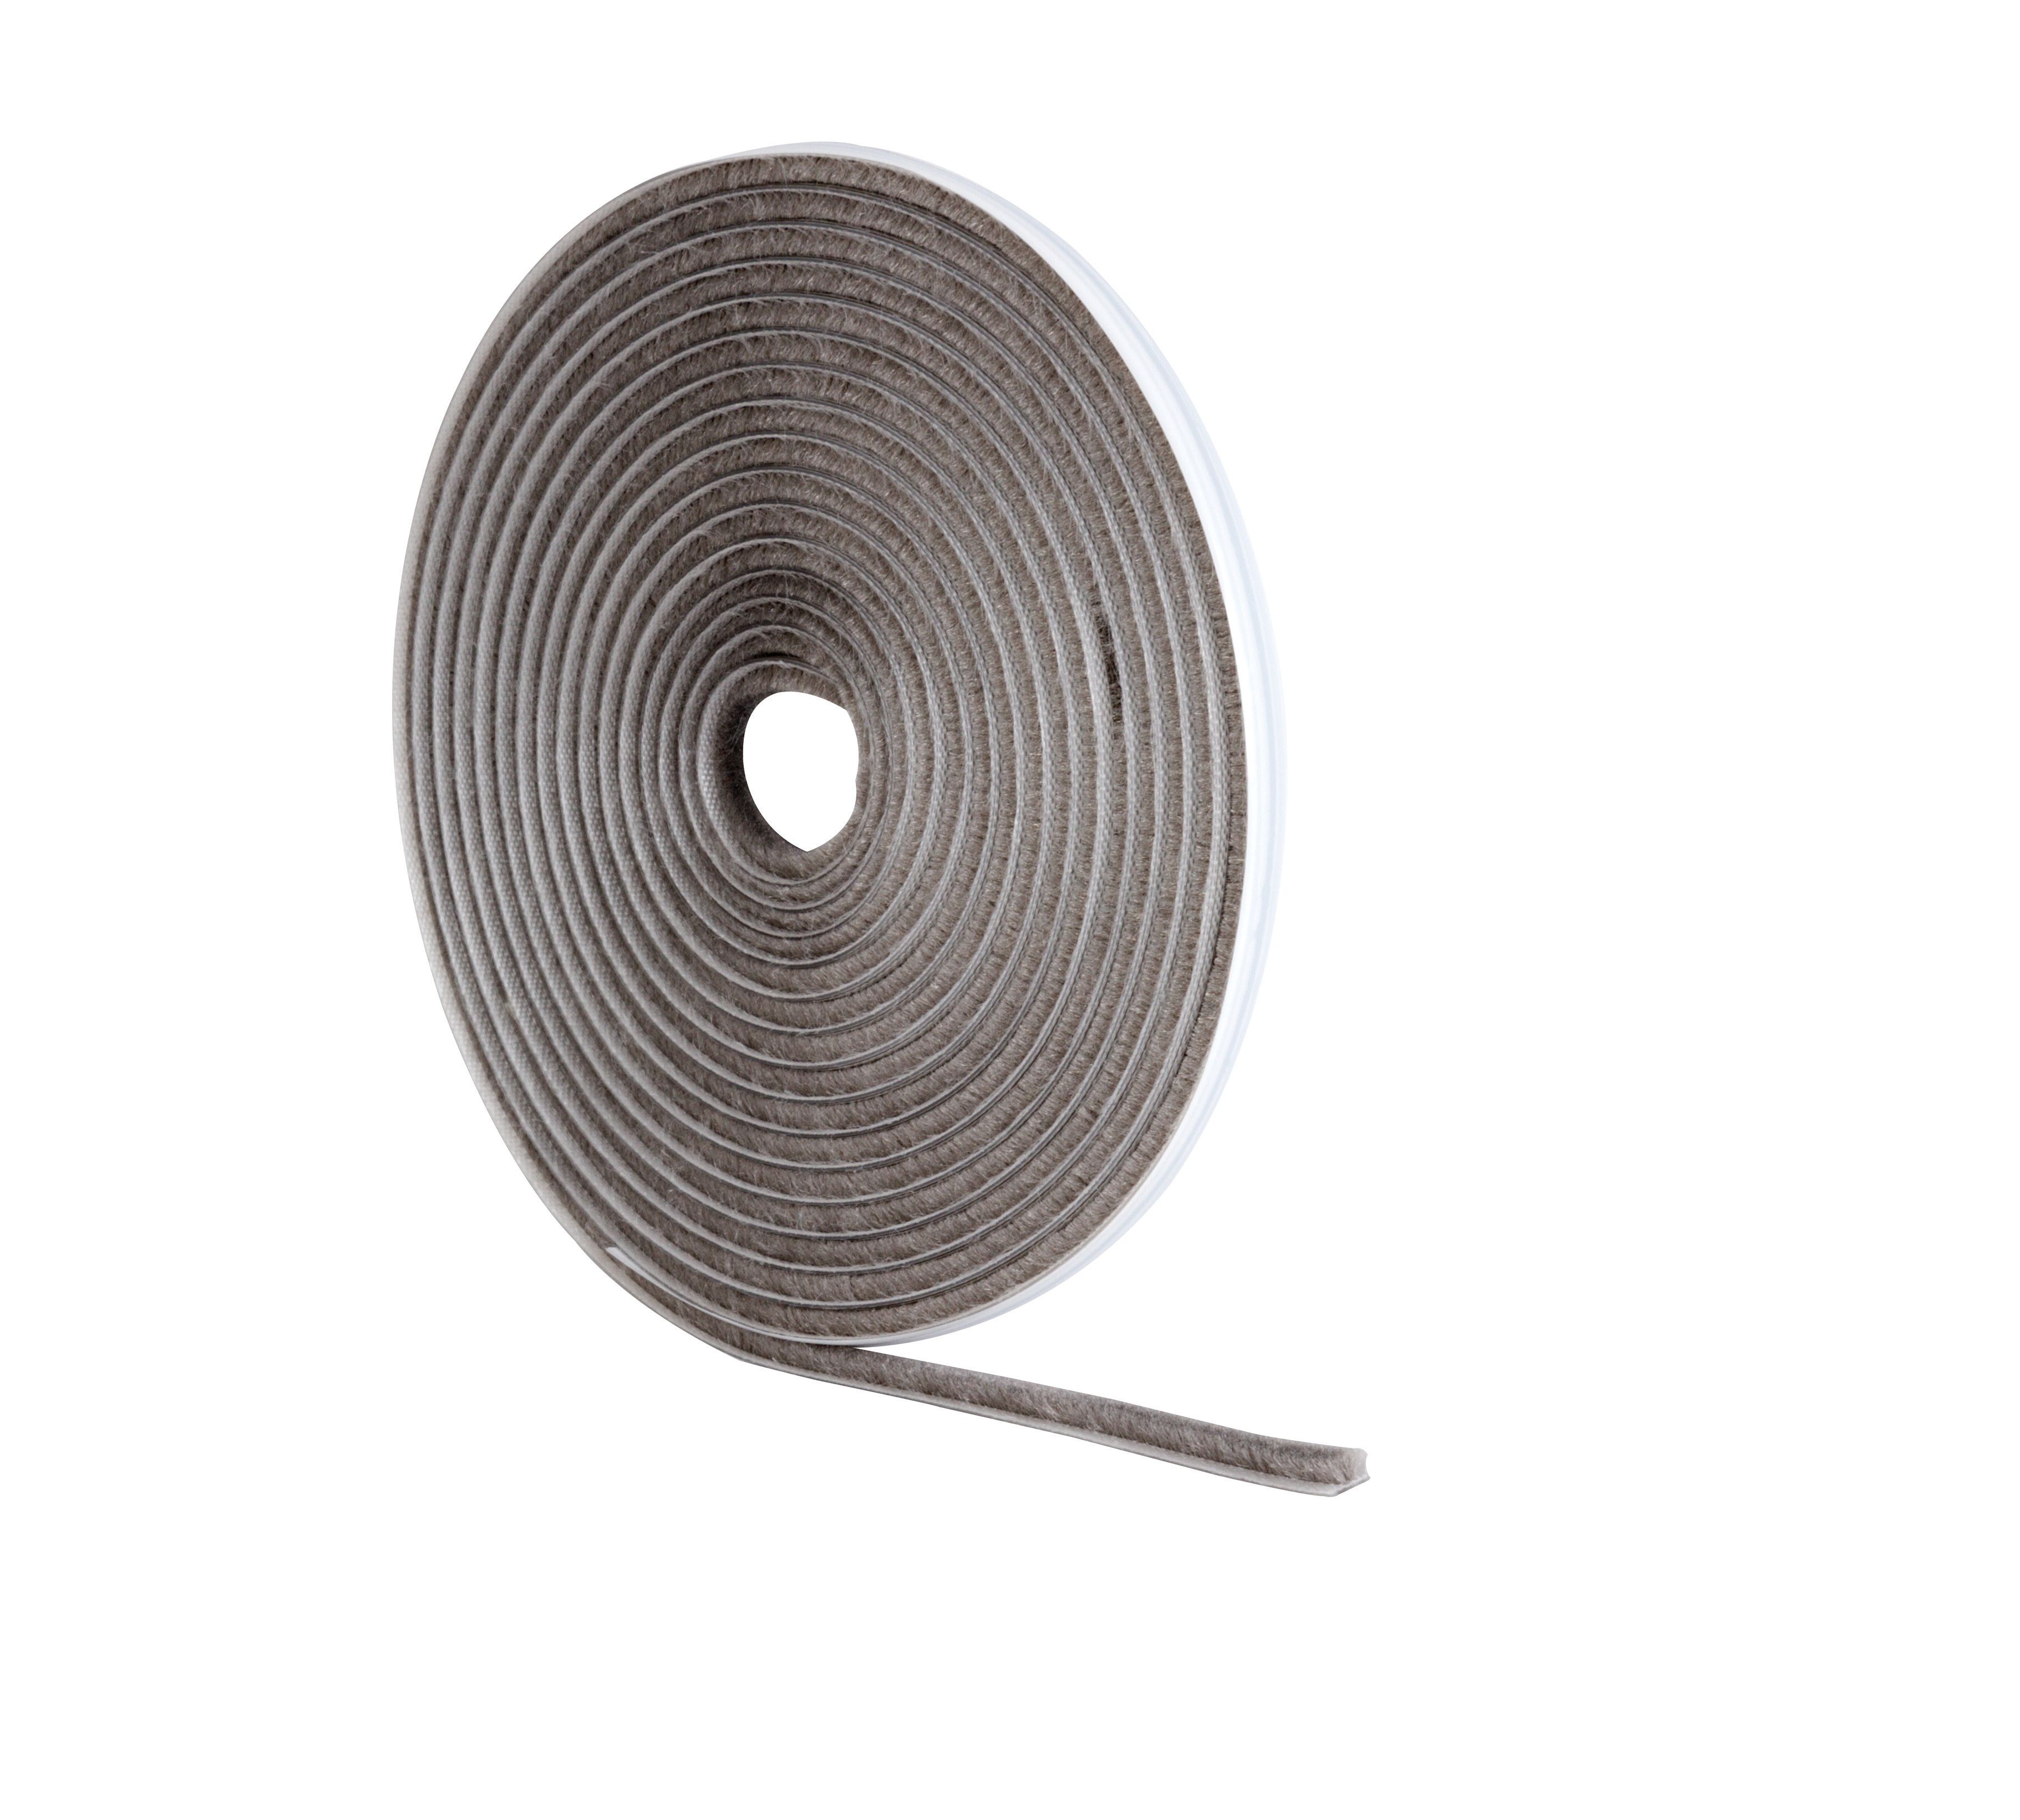 Wickes 5m Pile Tape Draught Seal - Grey